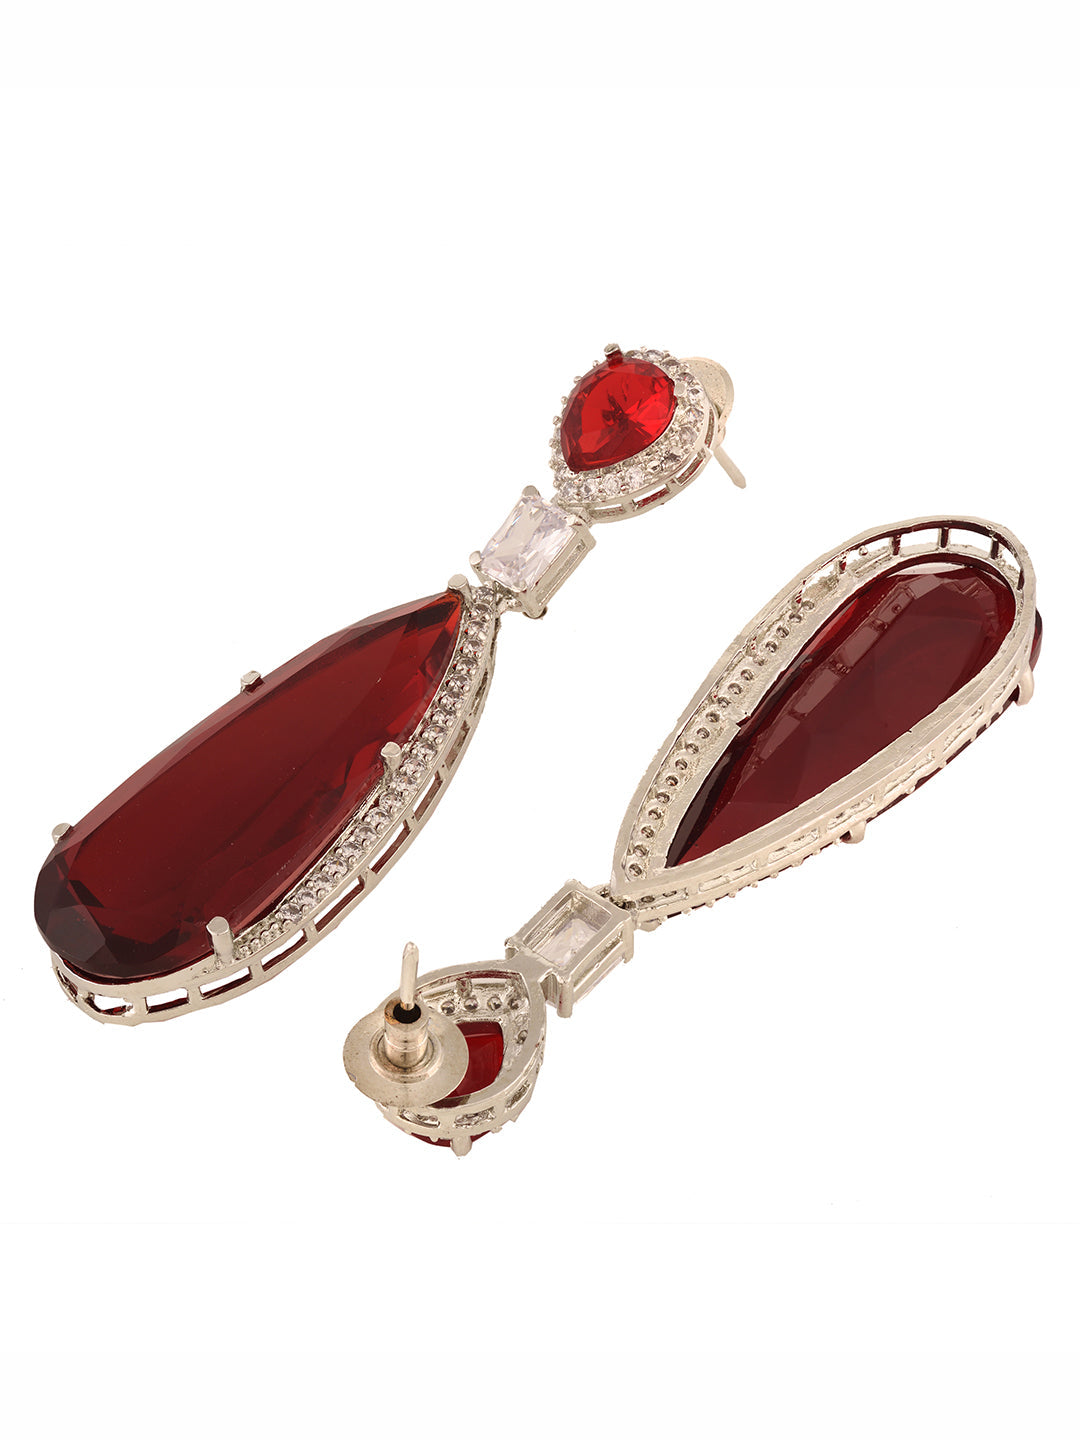 Red Contemporary Drop Earrings, zaveri pearls, sale price rs, sale price, sale gold plated, sale gold, sale, rubans, ring, regular price, priyassi jewellery, kushal's - Saraf RS Jewellery